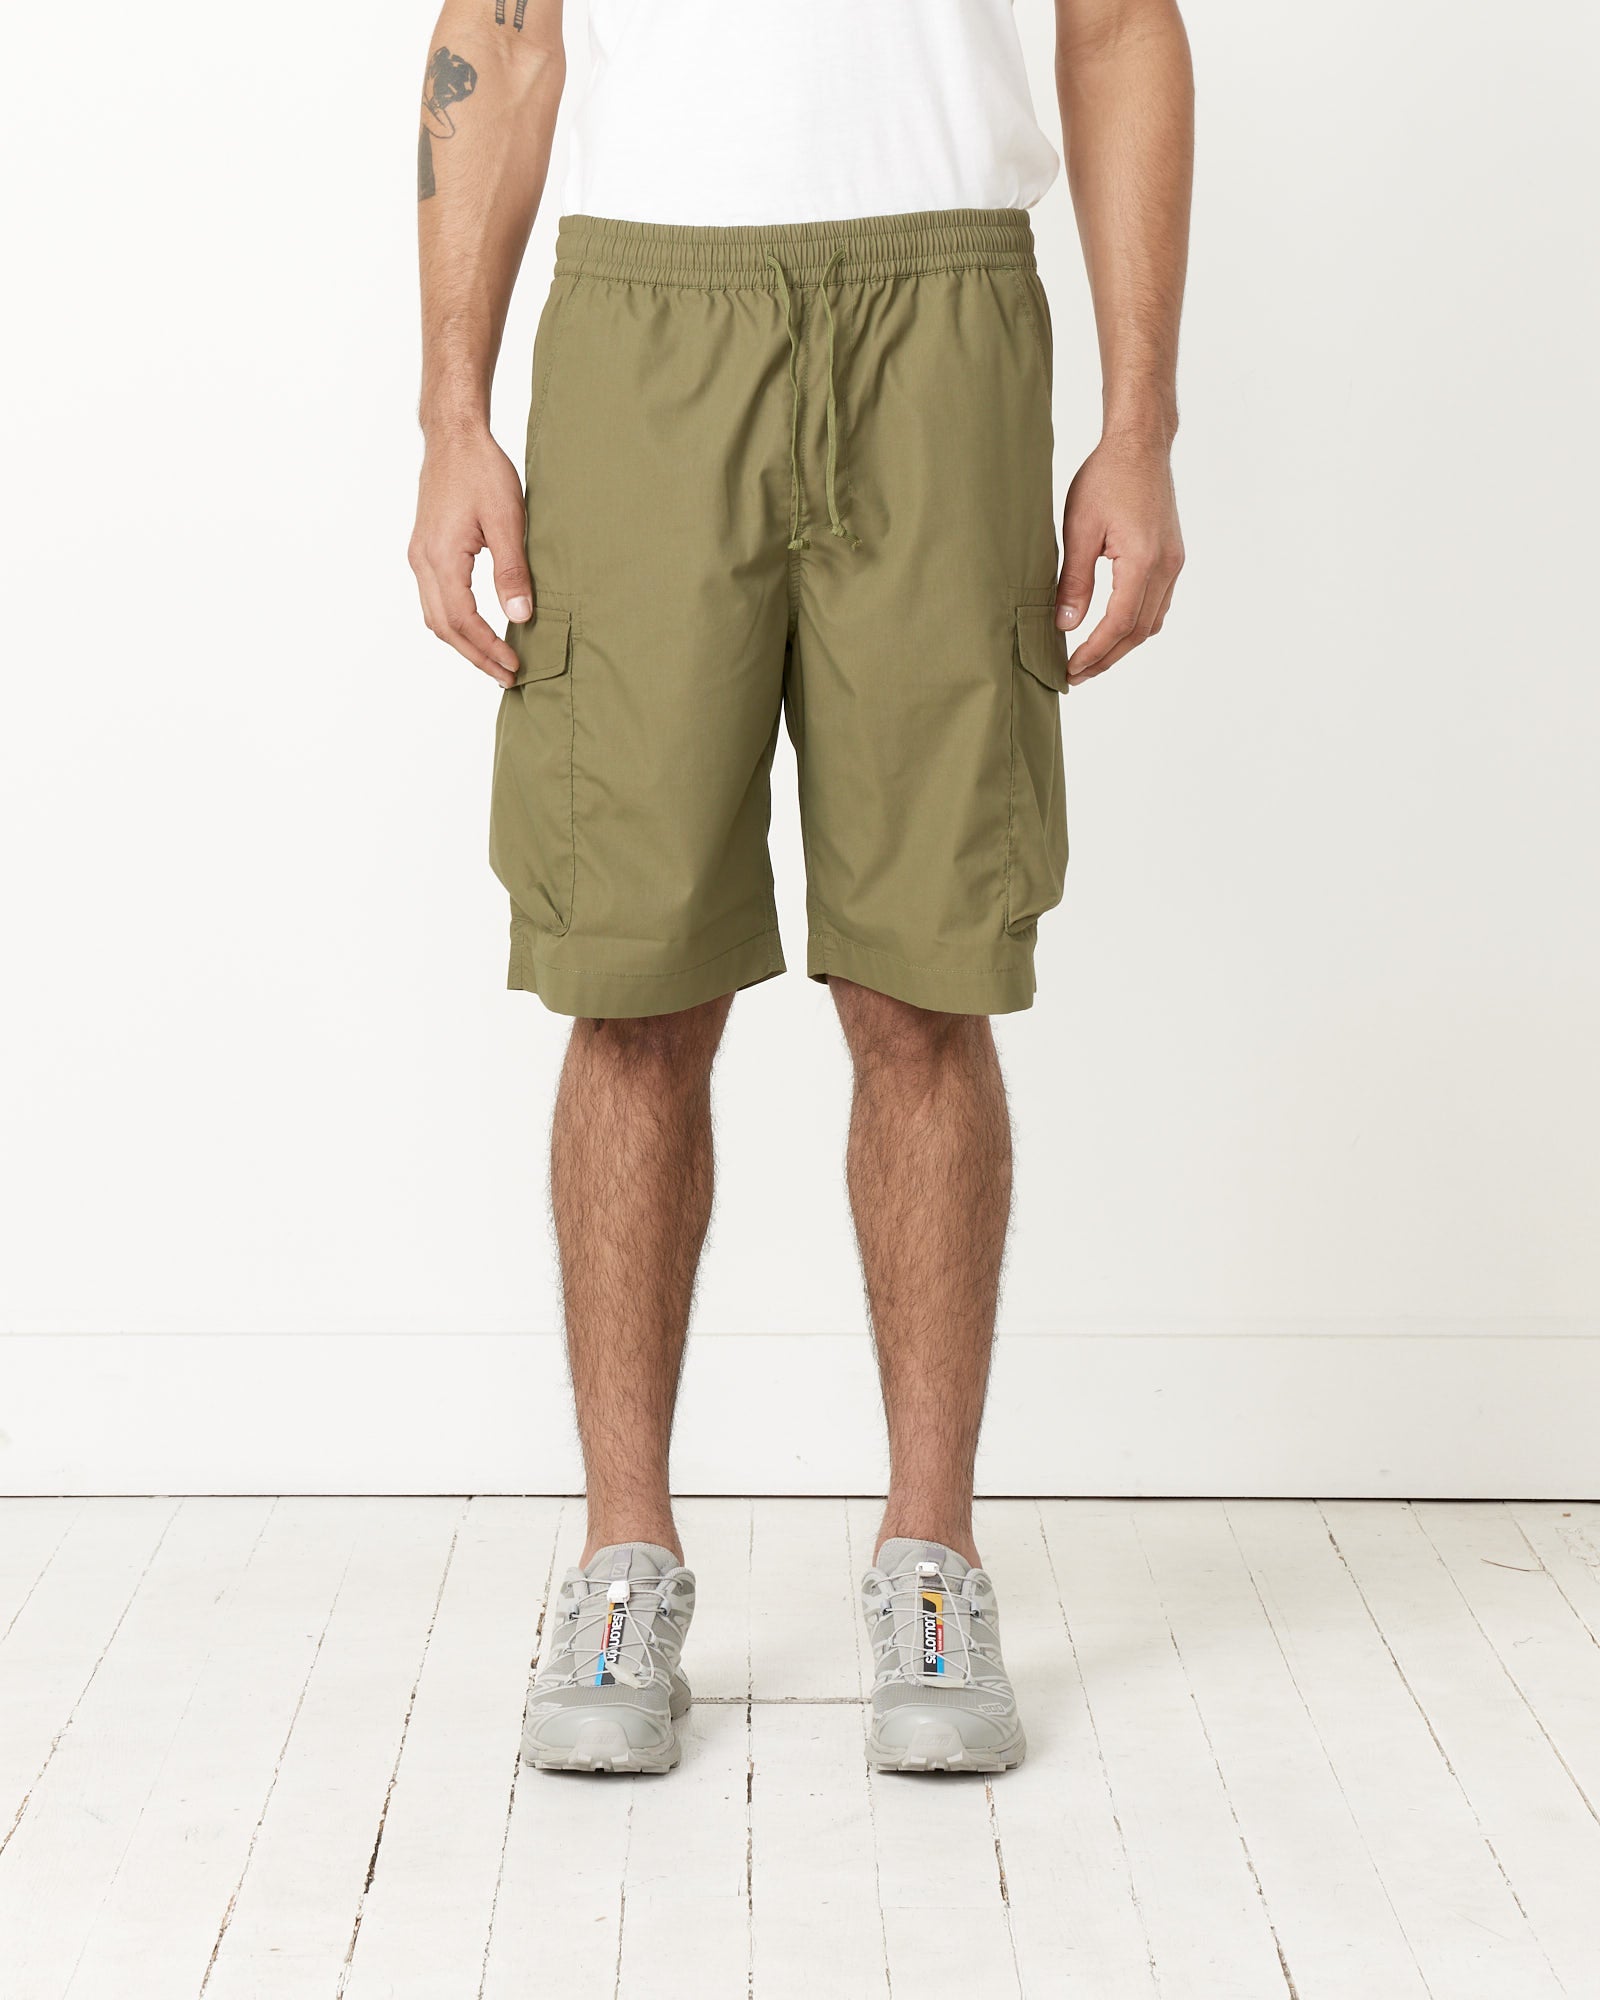 Parachute Short in Olive